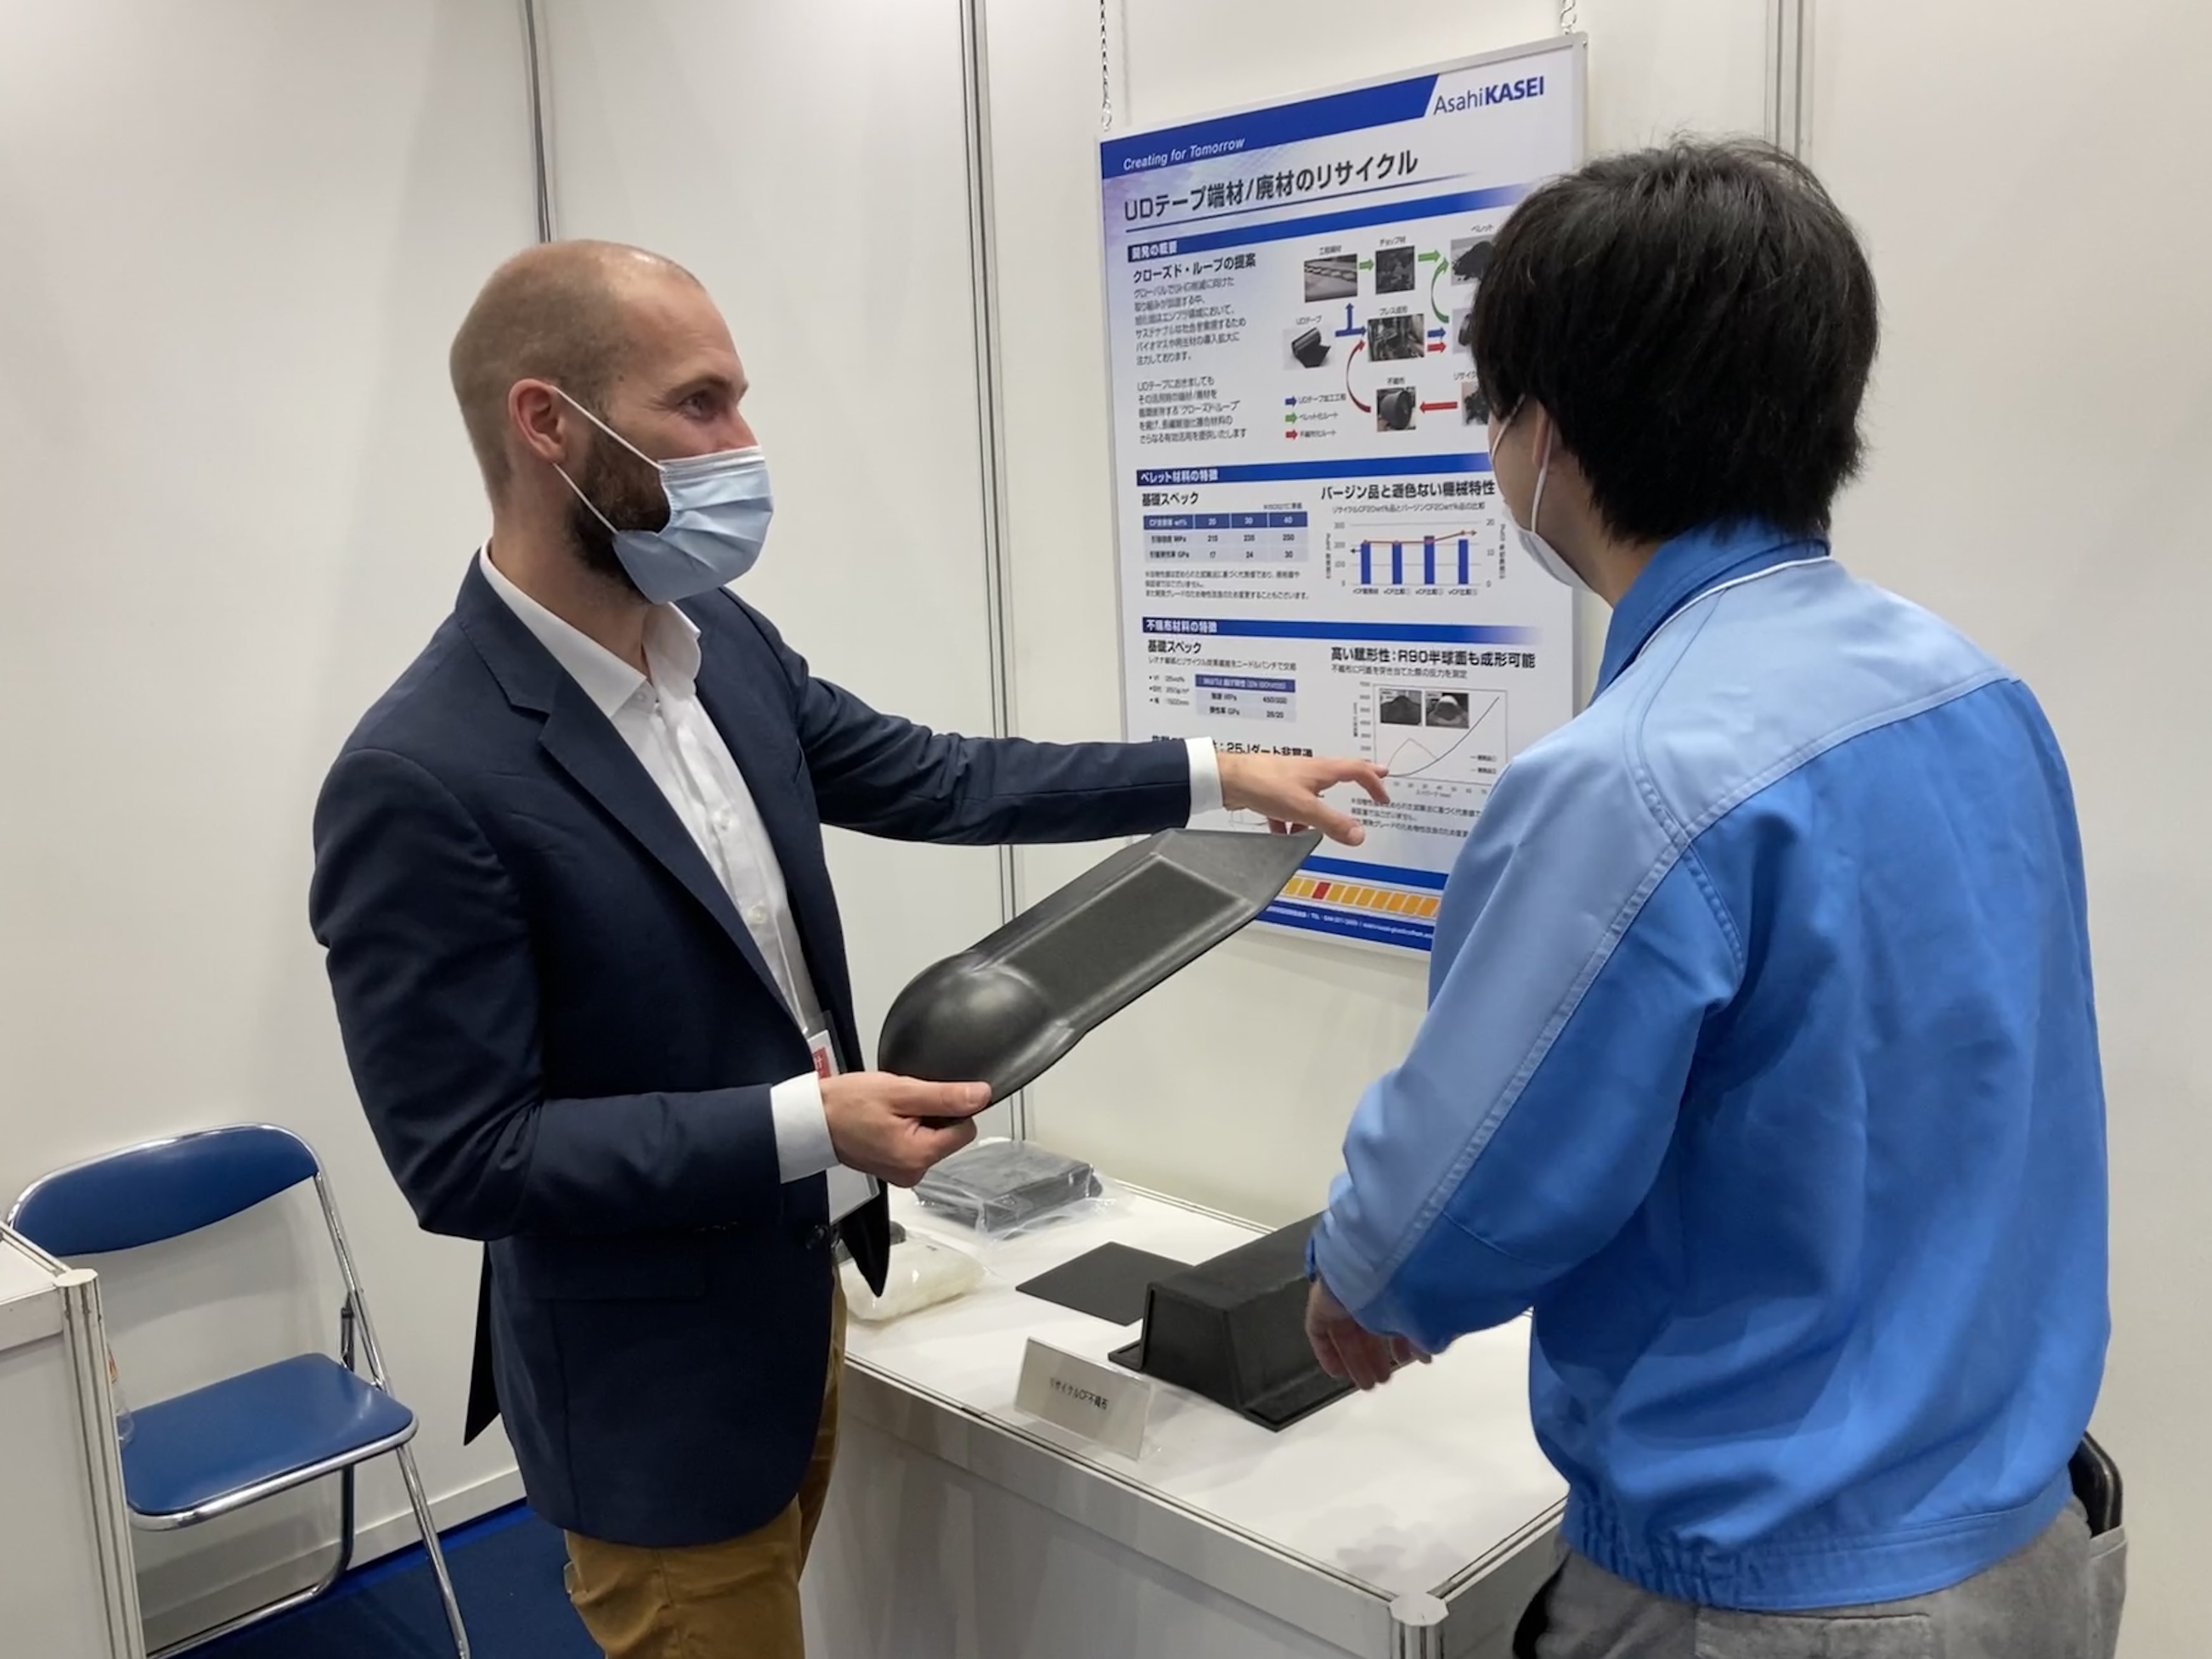 Networking on the topic of carbon recycling at the SAMPE conference in Tokyo.